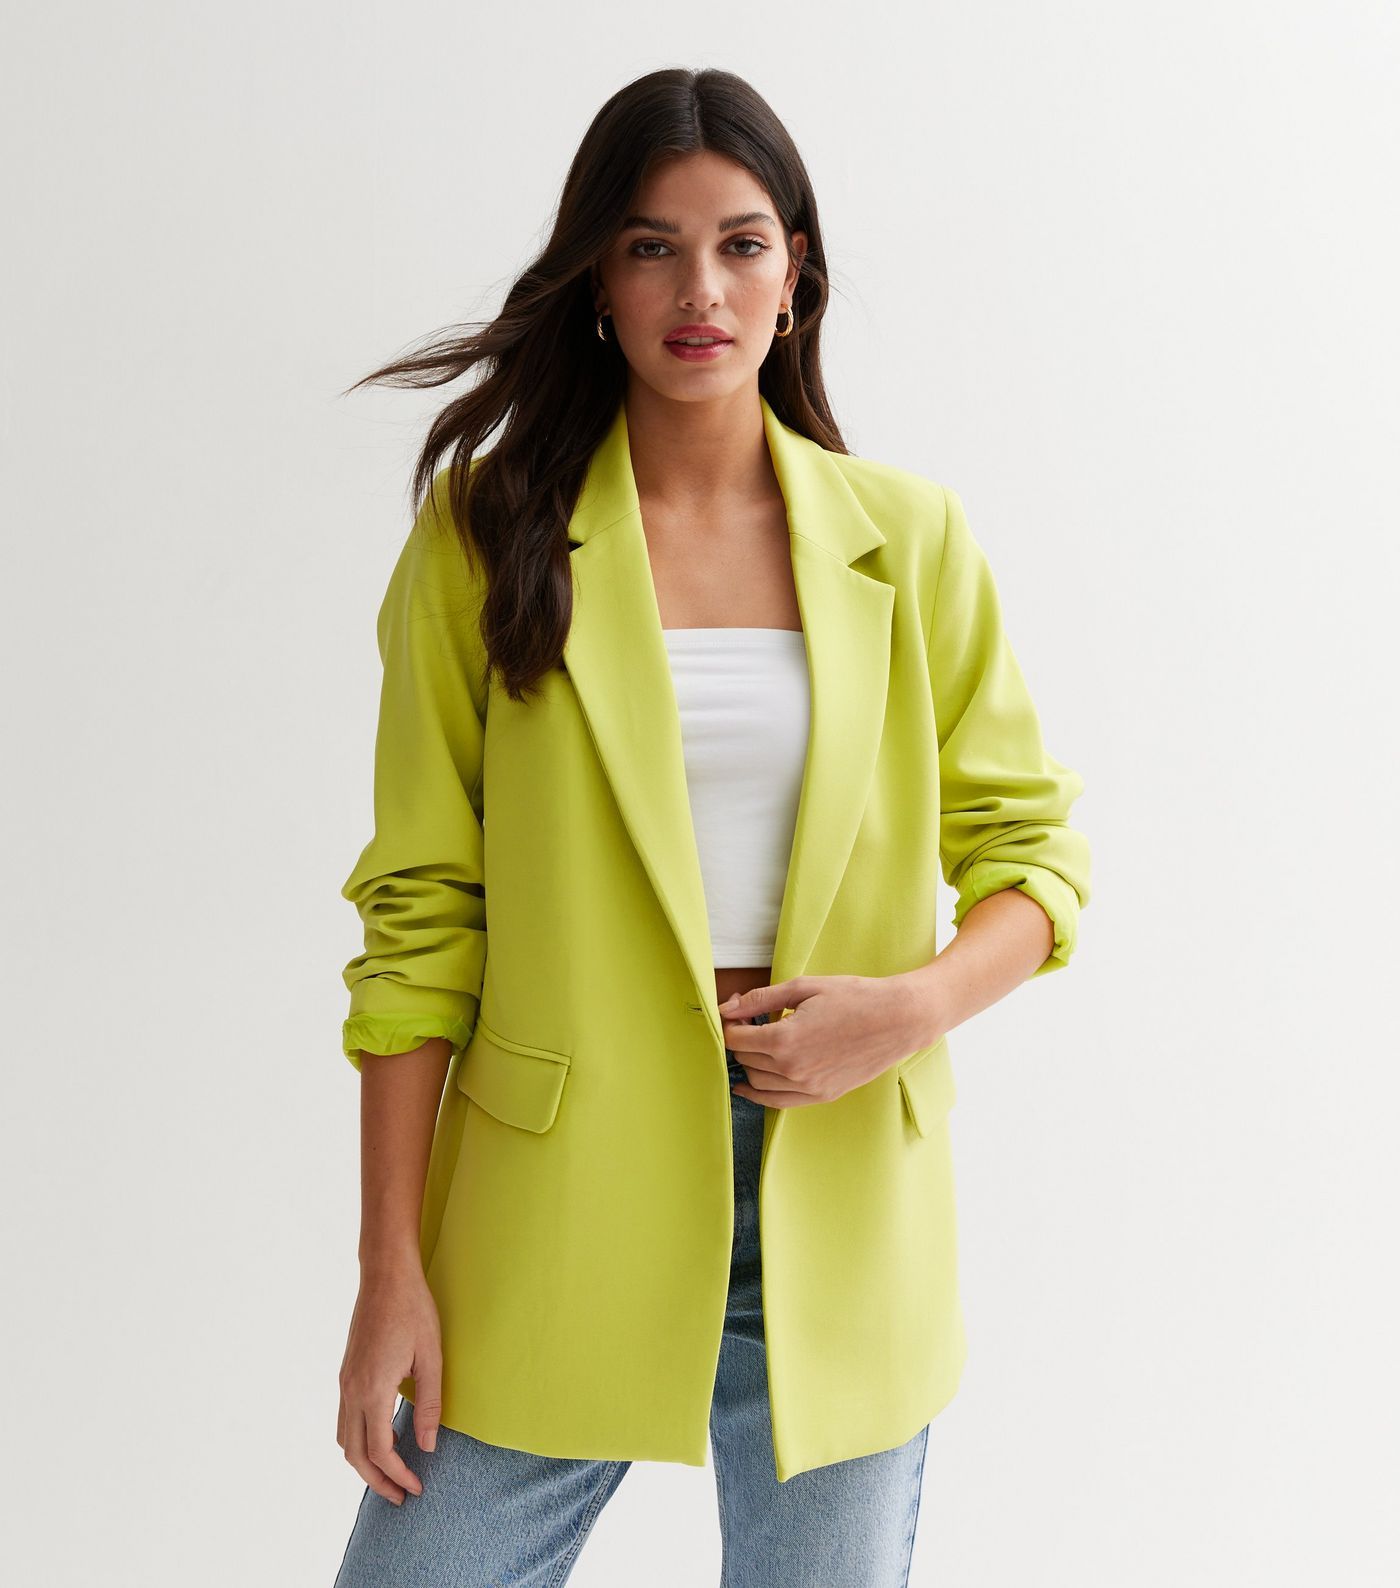 Yellow Revere Collar Oversized Blazer
						
						Add to Saved Items
						Remove from Saved Ite... | New Look (UK)